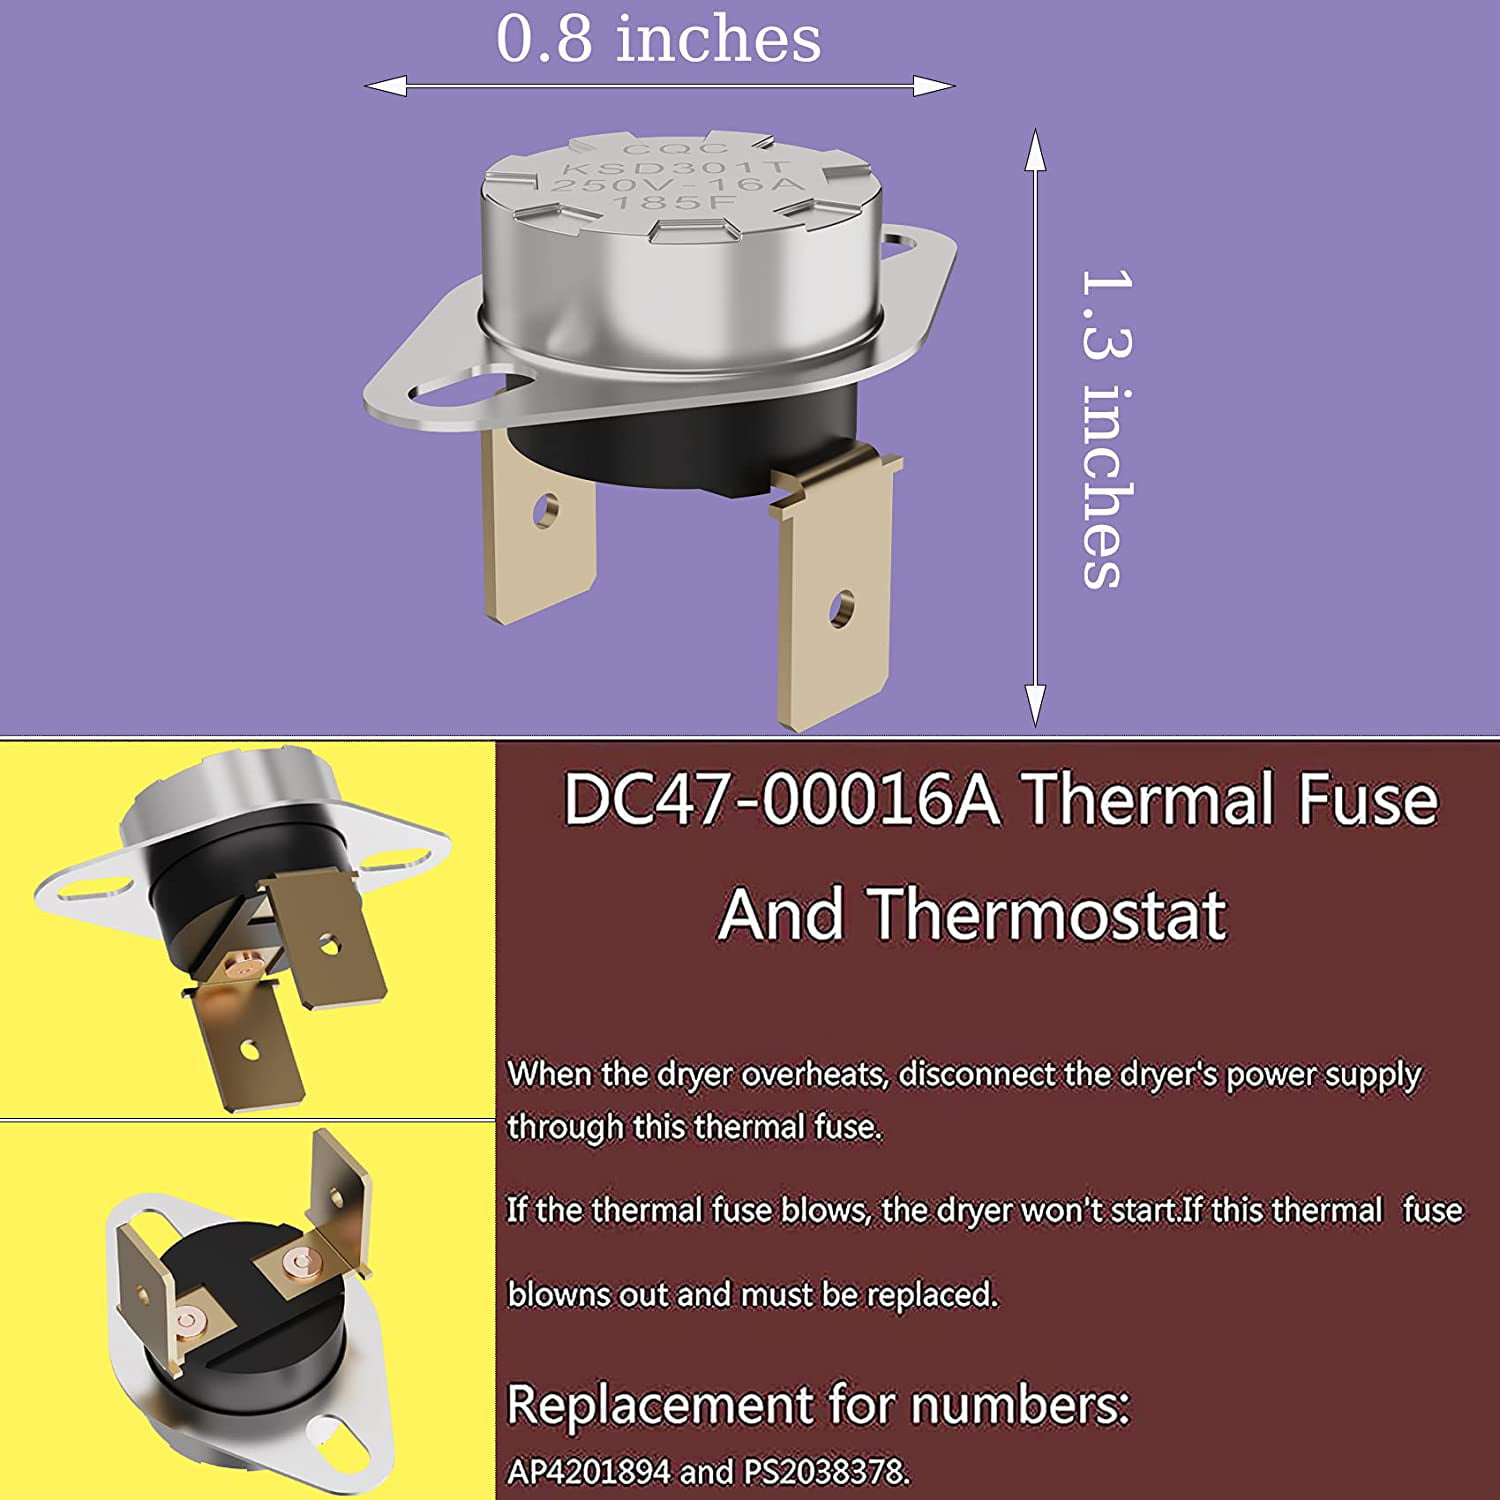 DC96-00887A Thermal Fuse, DC47-00018A for Samsung 3 Piece Dryer Heating Element Thermal Cut-off Fuse and Thermostat DC47-00019A